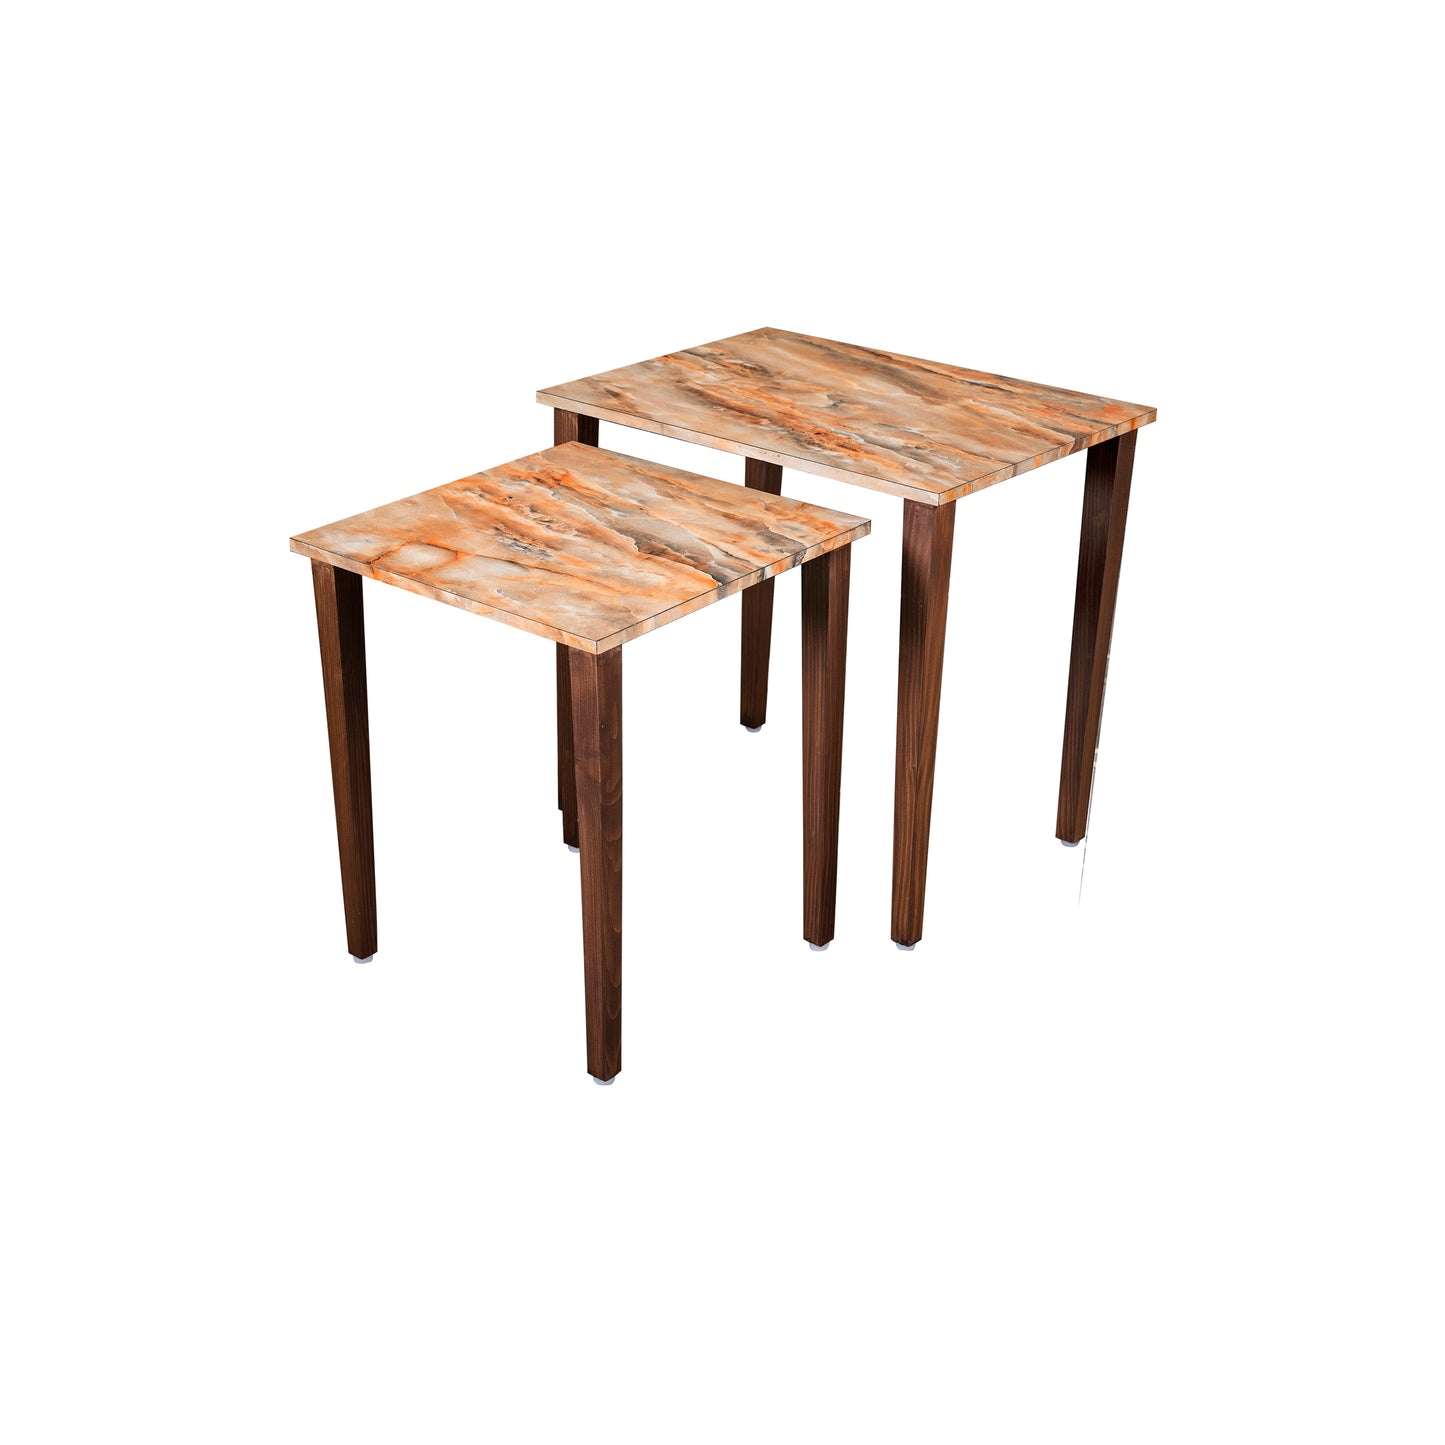 A Tiny Mistake Mountain Wooden Rectangle Nesting Tables (Set of 2), Living Room Decor